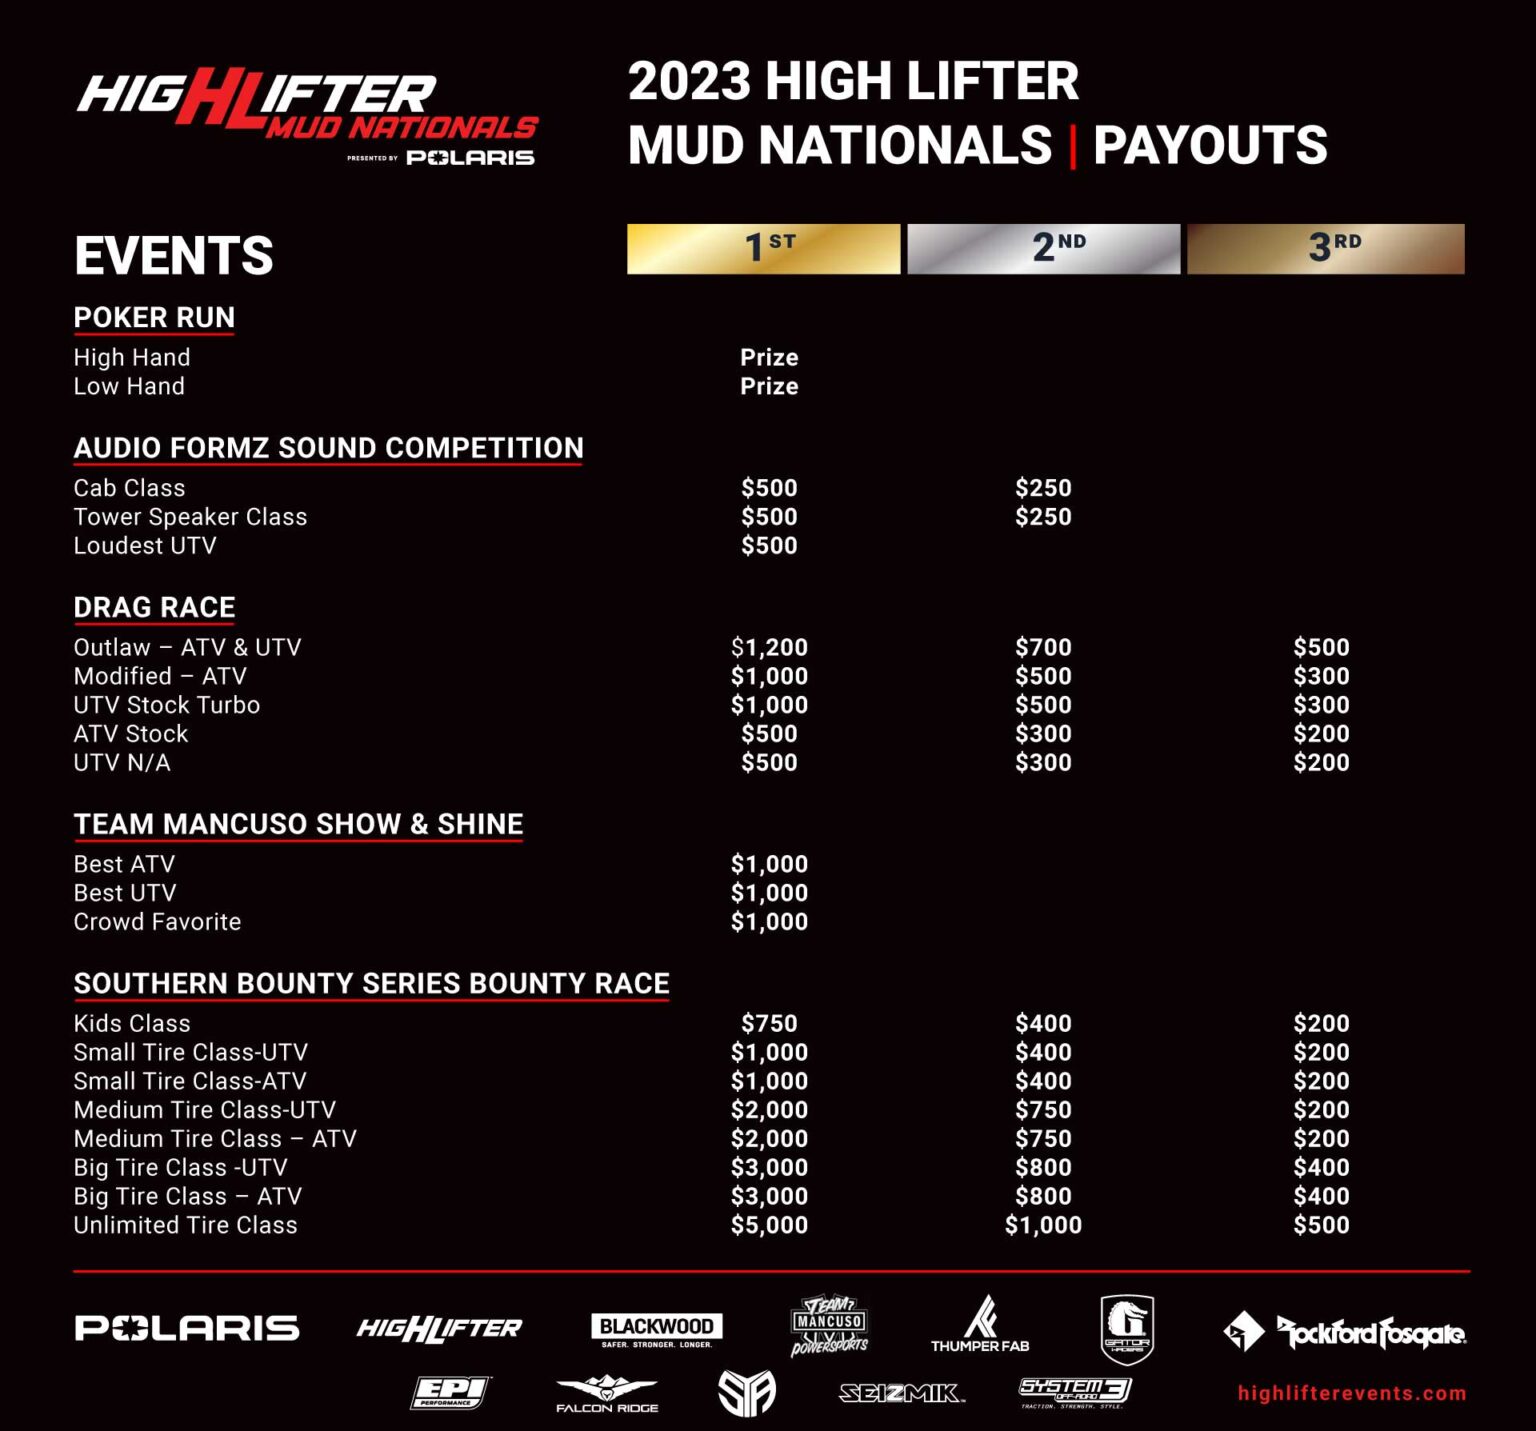 Payouts for 2023 Competitions at High Lifter Mud Nationals